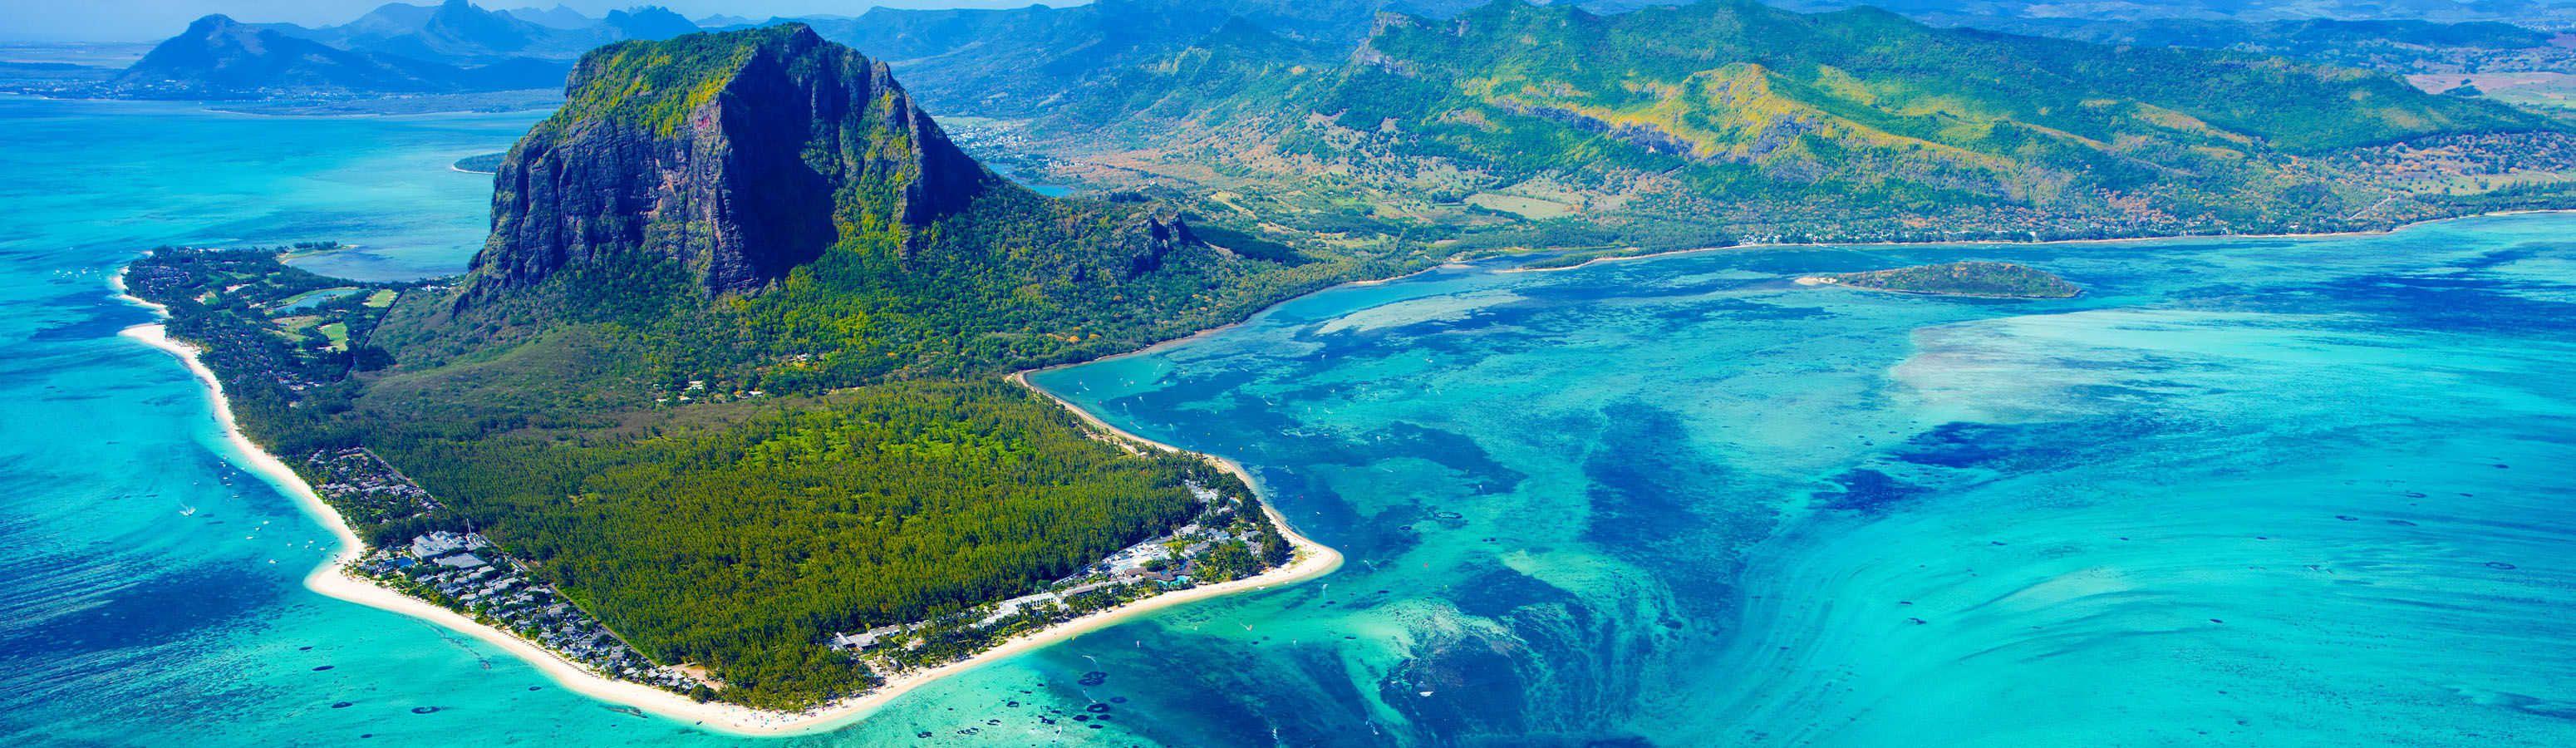 Fly to reality, fly to Mauritius!